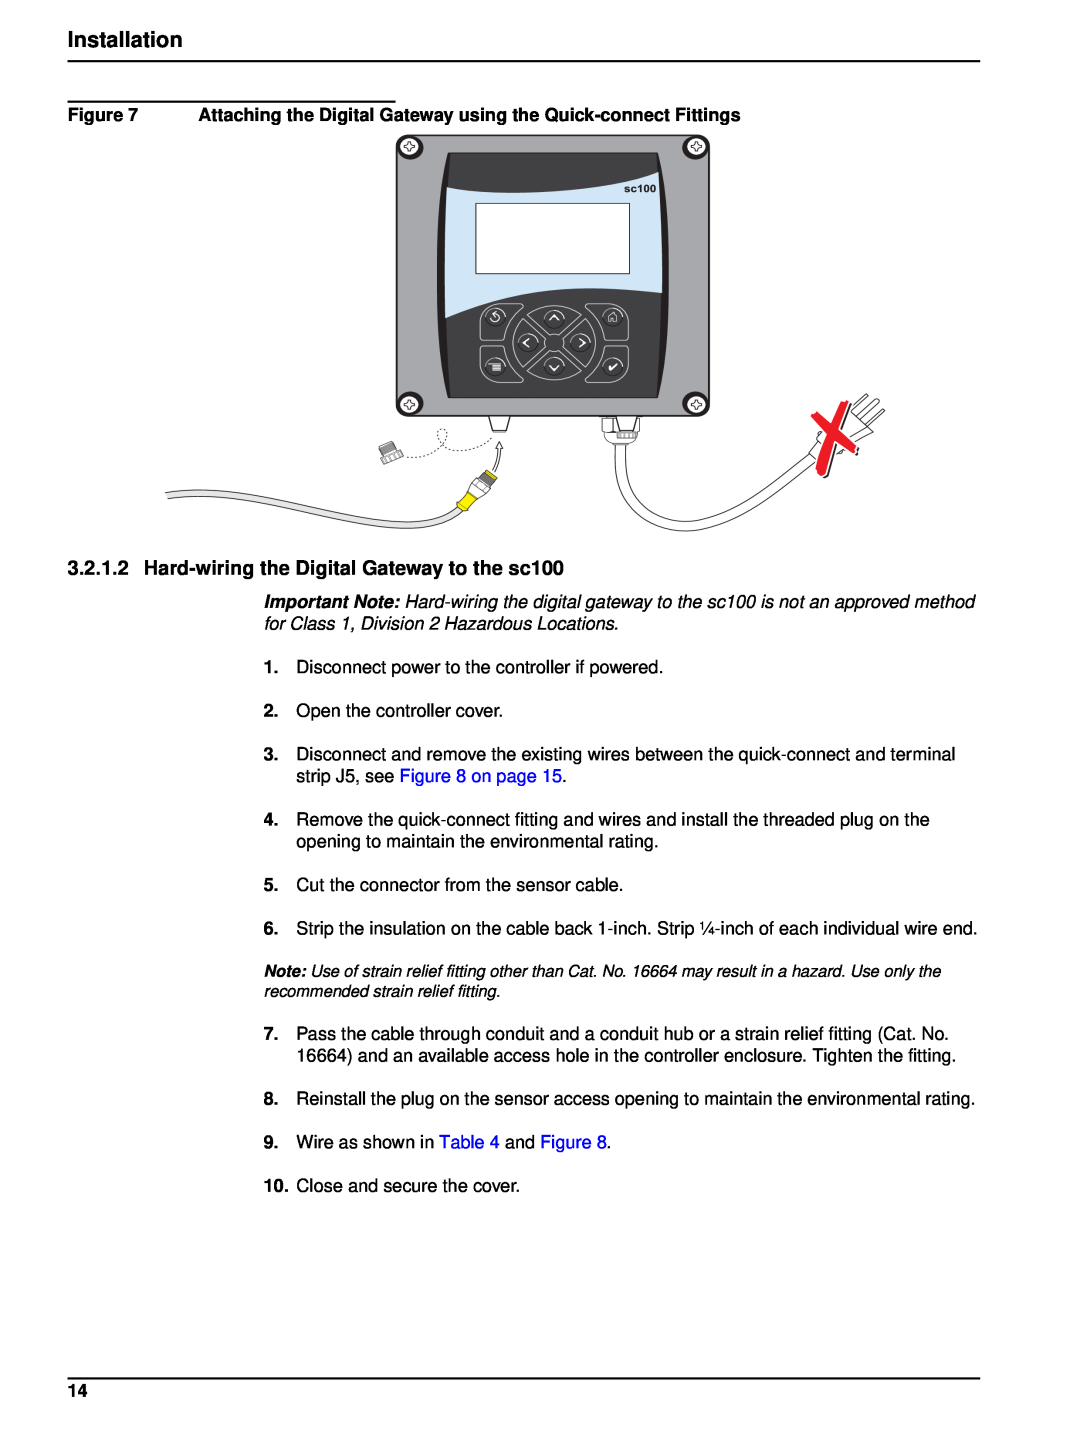 Hach 6120118 user manual Hard-wiring the Digital Gateway to the sc100, Installation 